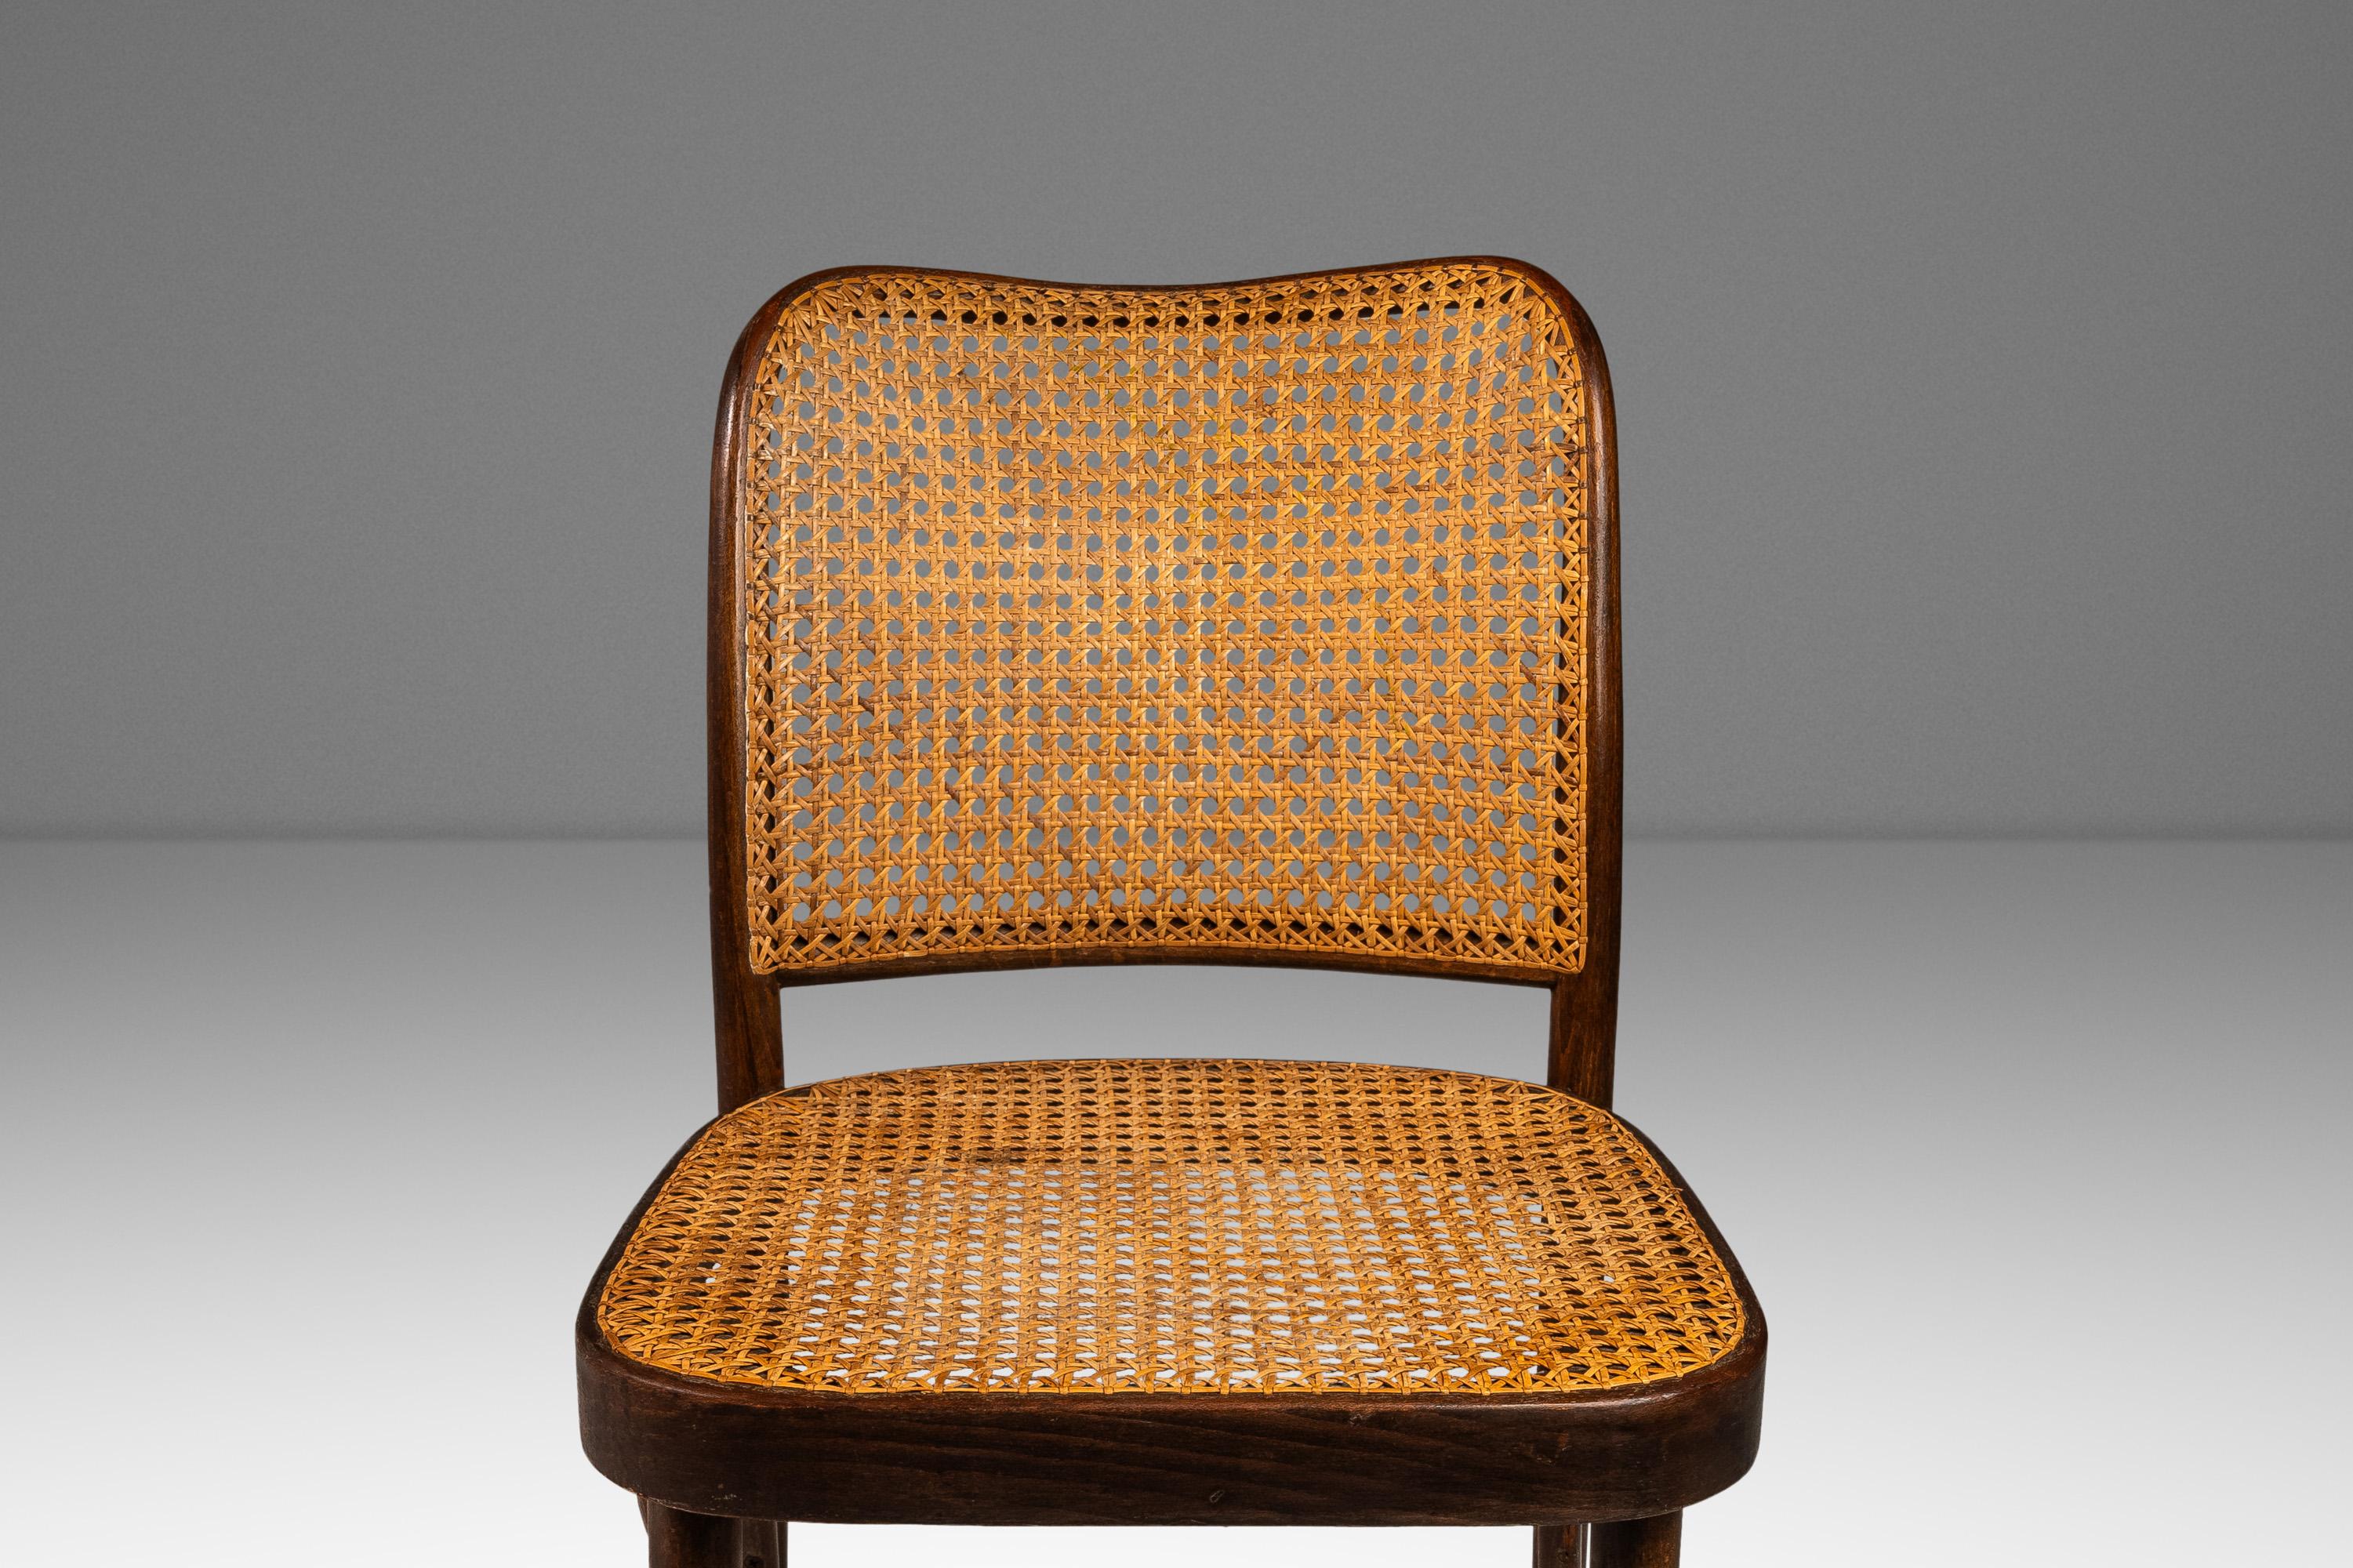 Bentwood Prague Model 811 Chair in Walnut by Josef Frank, Poland, c. 1960s For Sale 5